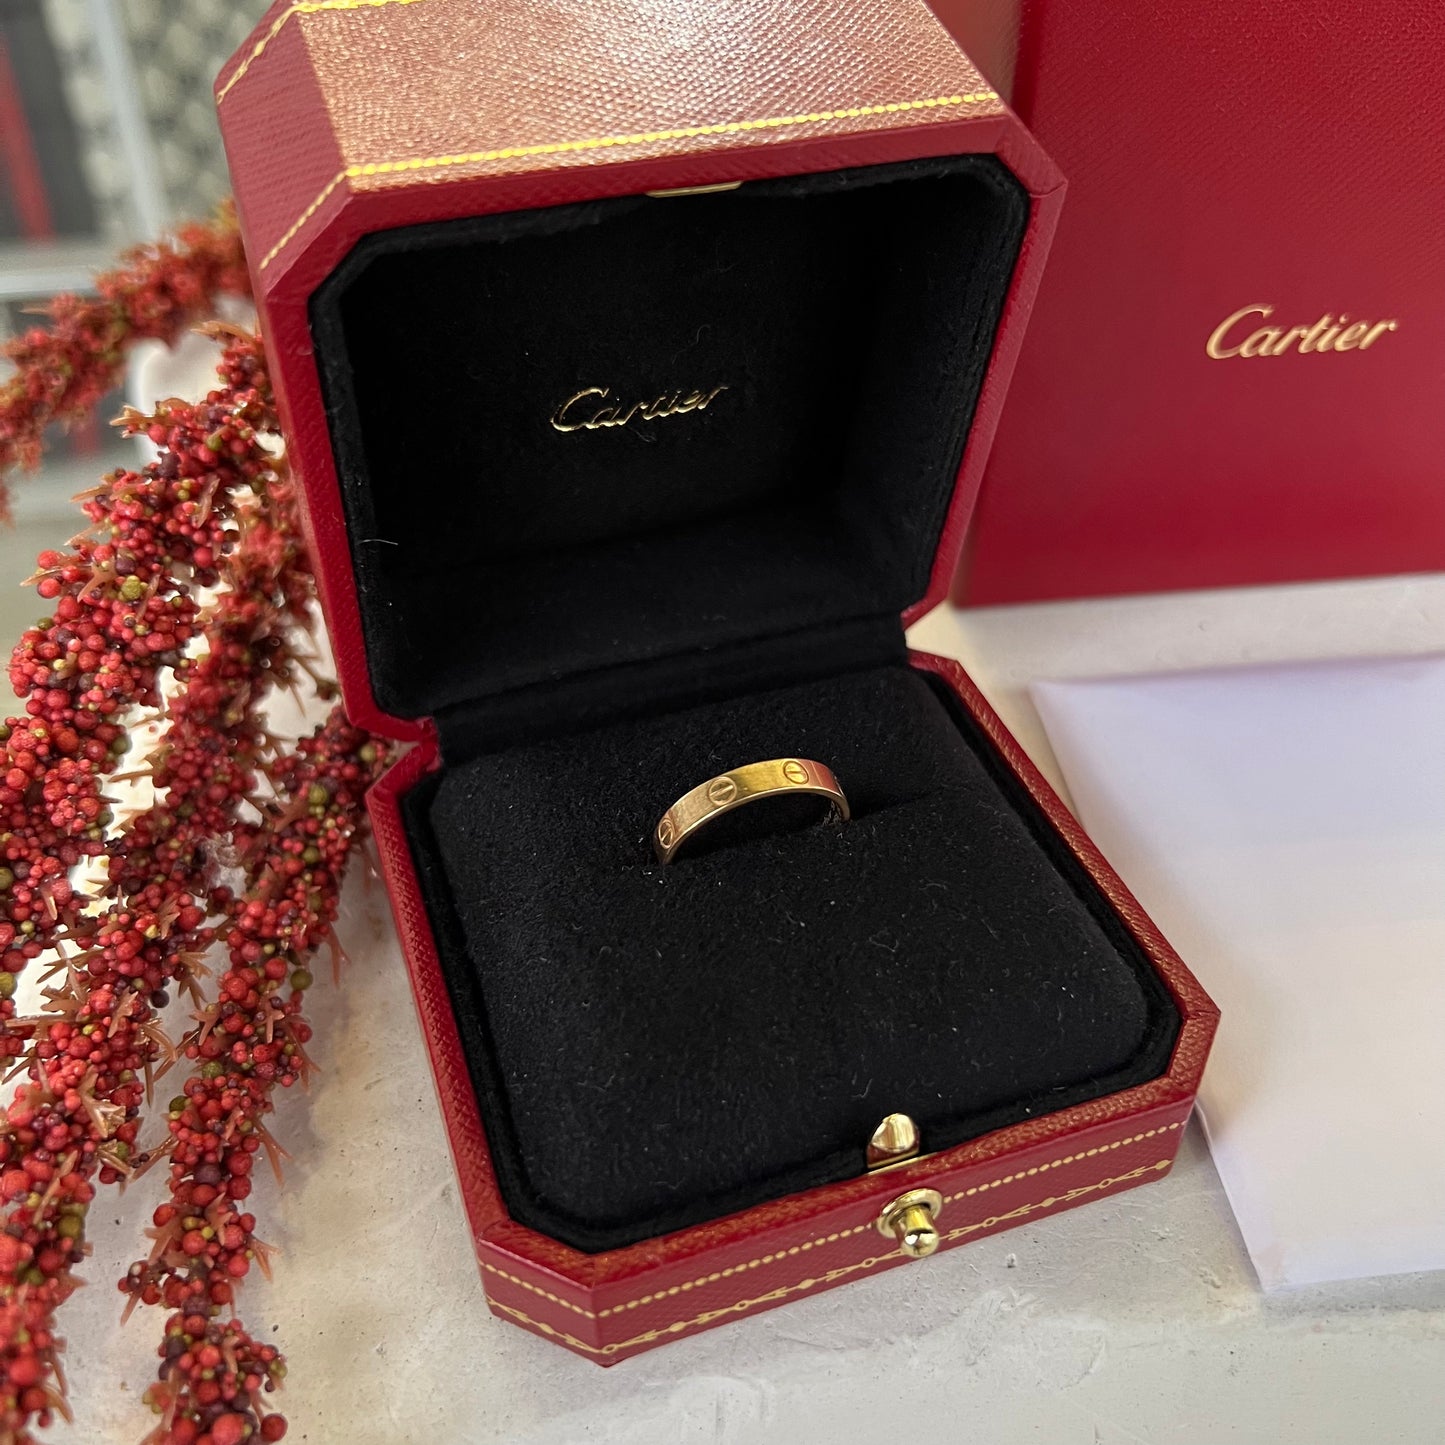 Cartier 18k Yellow Gold Love Ring with Box & Certificate, Size 56/ 7.5